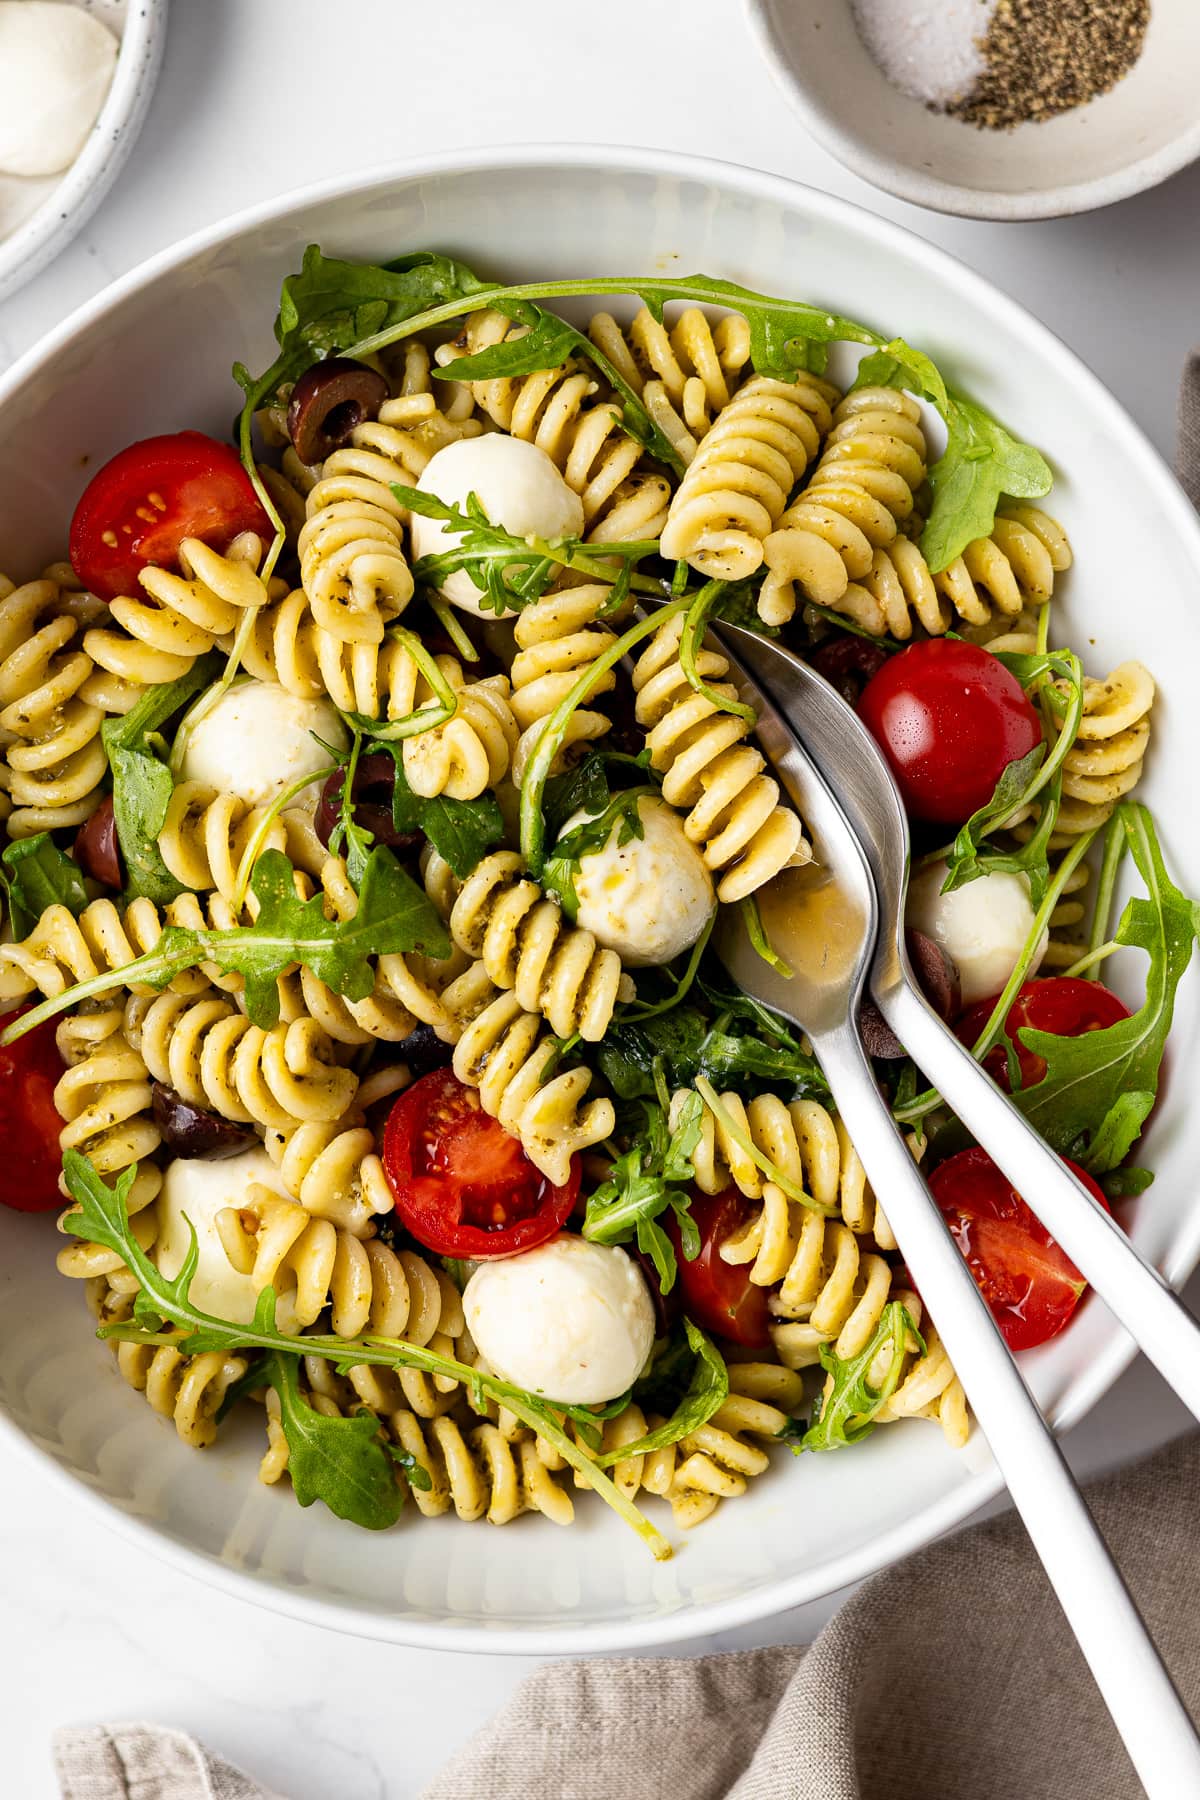 pesto caprese pasta salad in a bowl on a table with mozzarella pearls, arugula, and salt and pepper in separate bowl on the same table